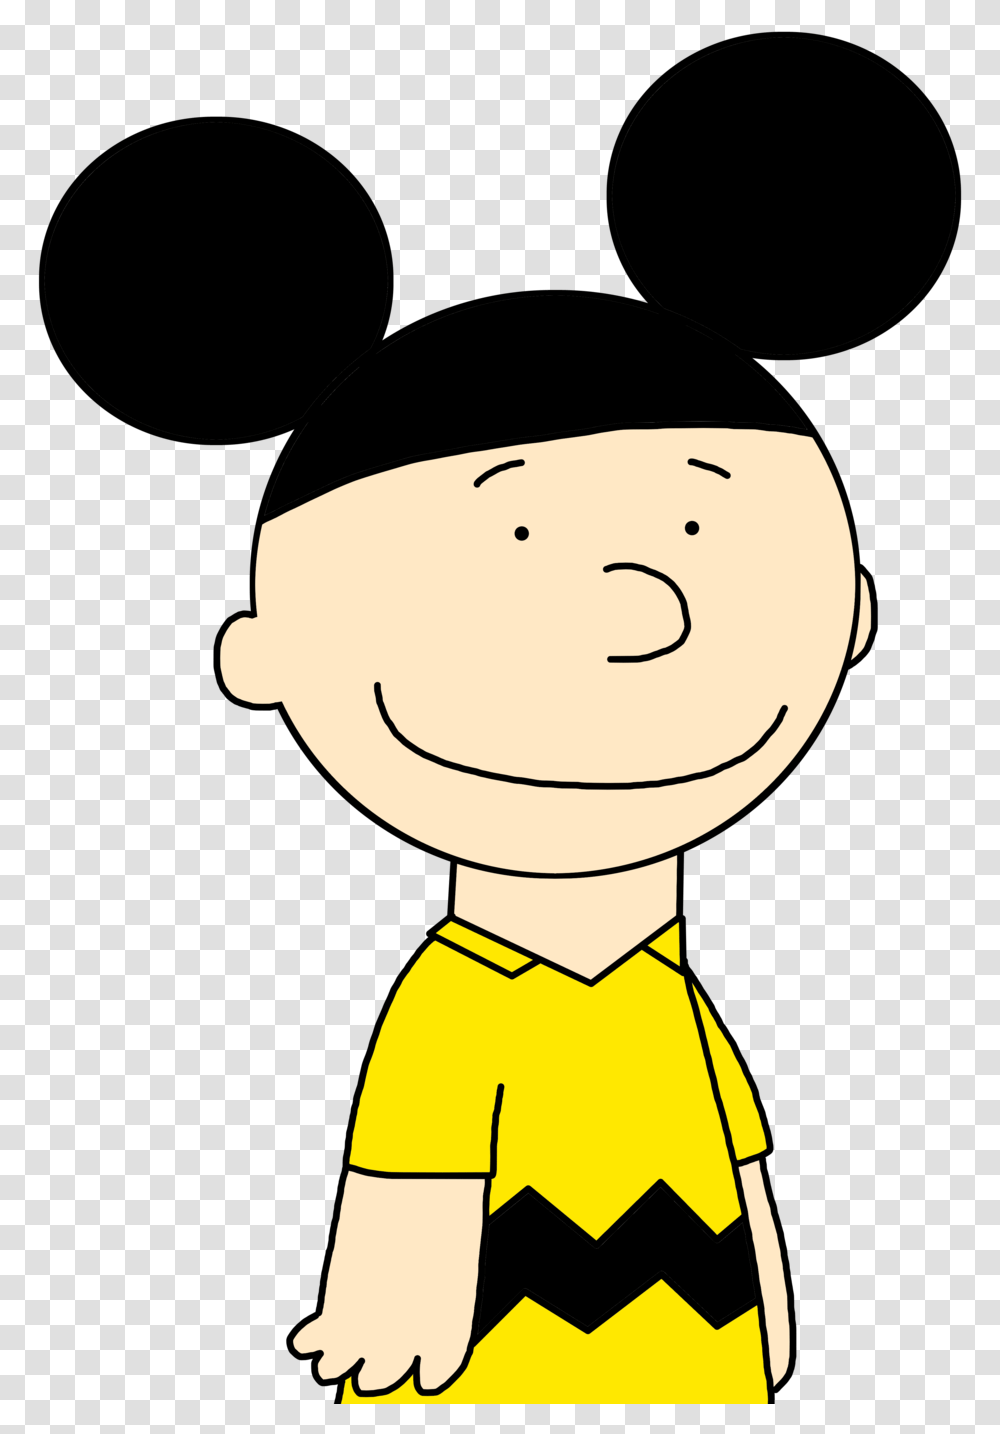 Charlie Brown With Mickey Mouse Ears By Marcospower1996 Charlie Brown Mickey Mouse, Toy, Hand, Figurine, Silhouette Transparent Png